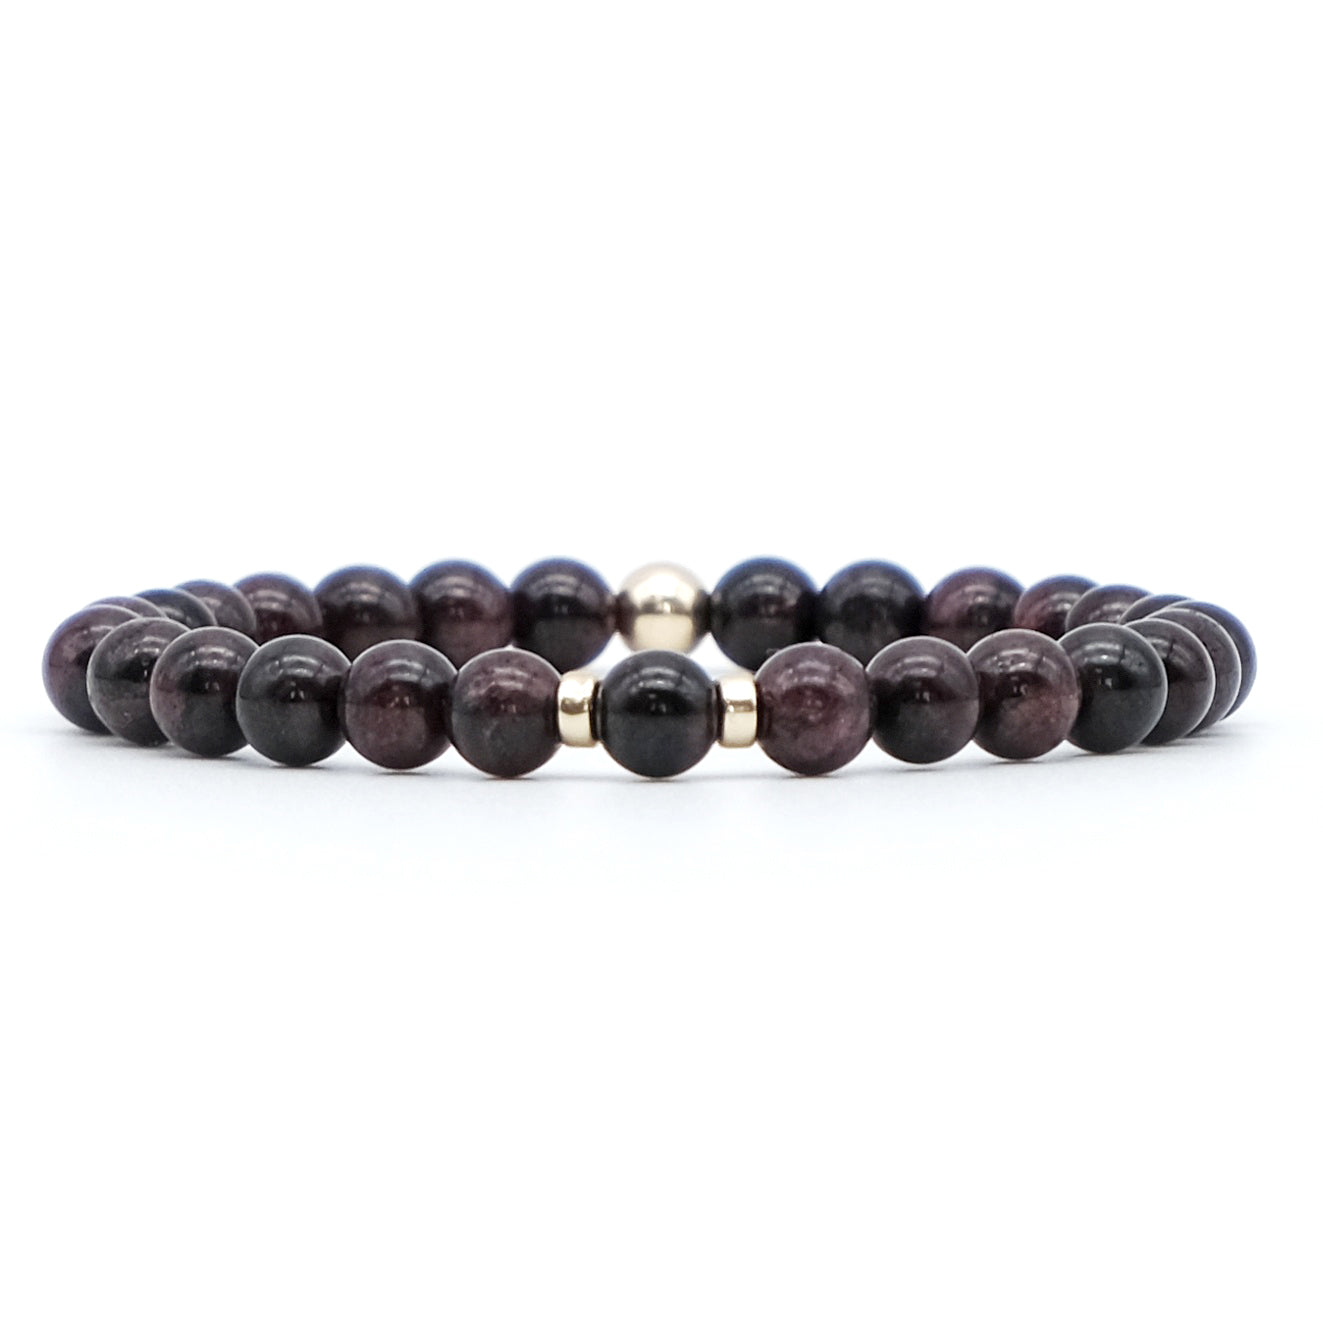 A garnet gemstone bracelet in 6mm beads with gold filled accessories